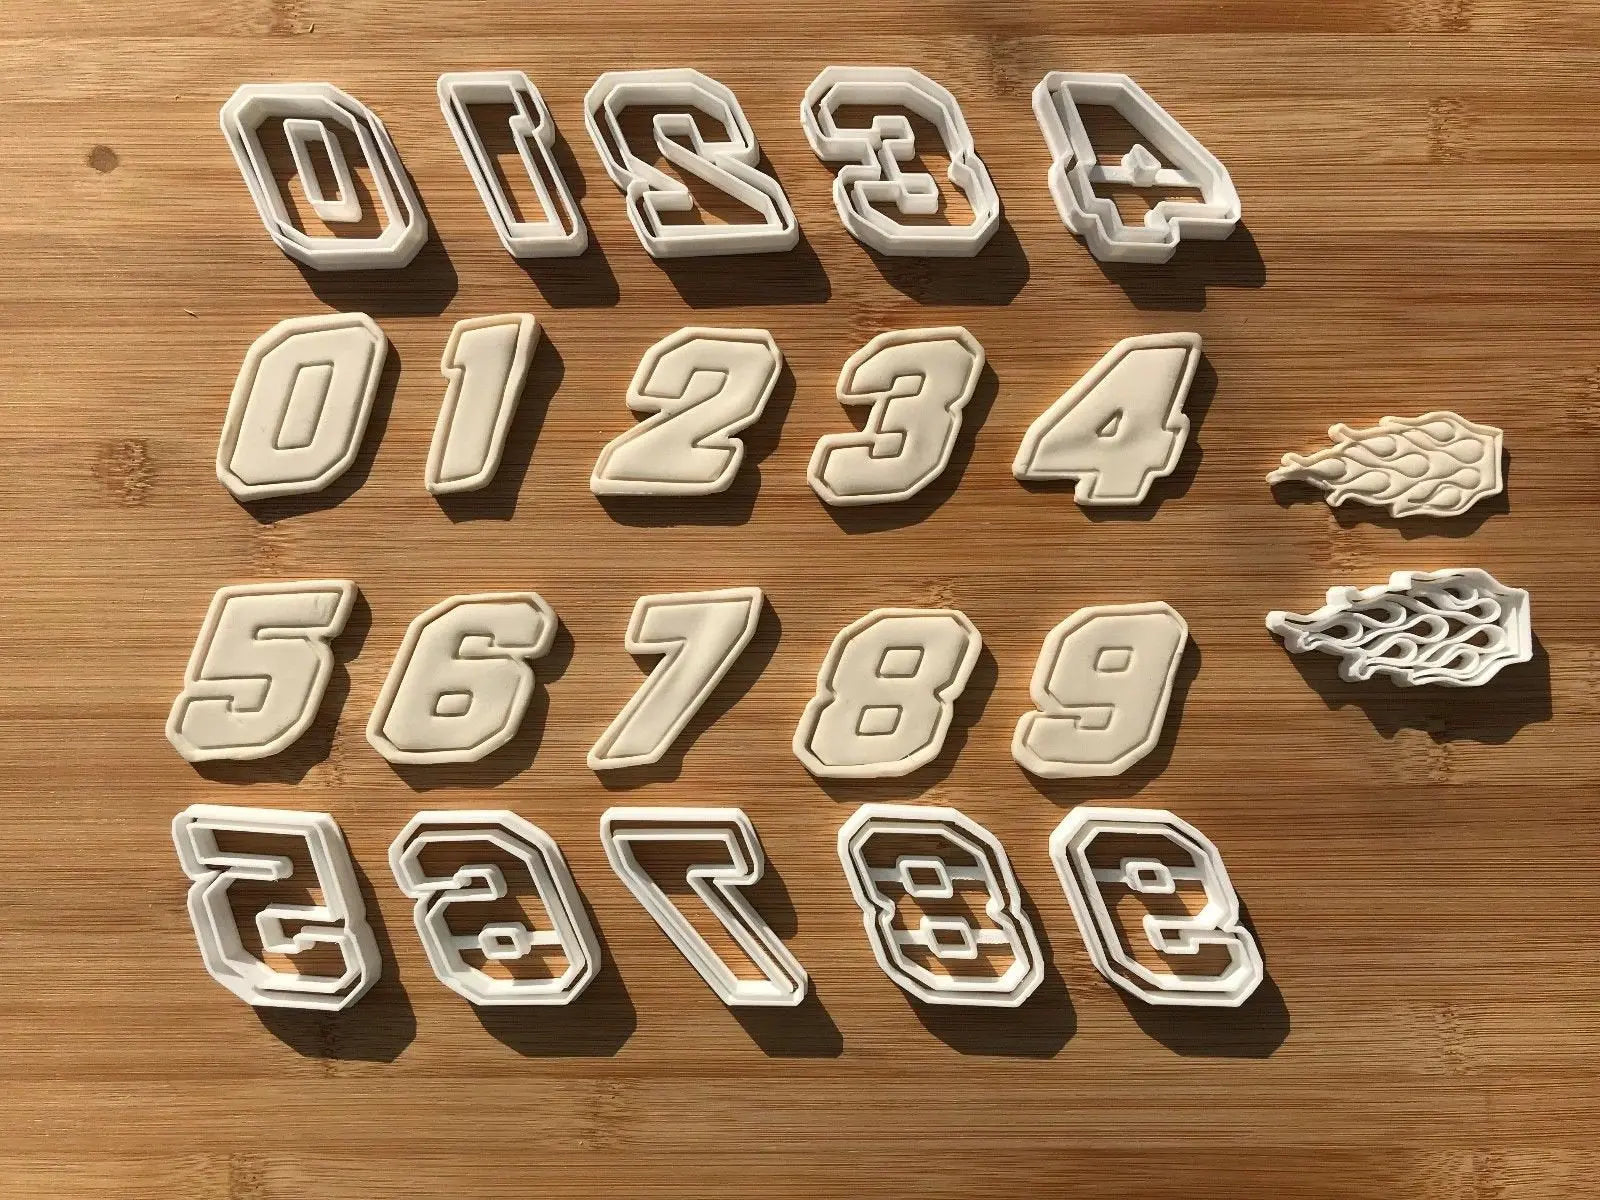 0 Zero Racing Number Cookie Cutter MEG cookie cutters